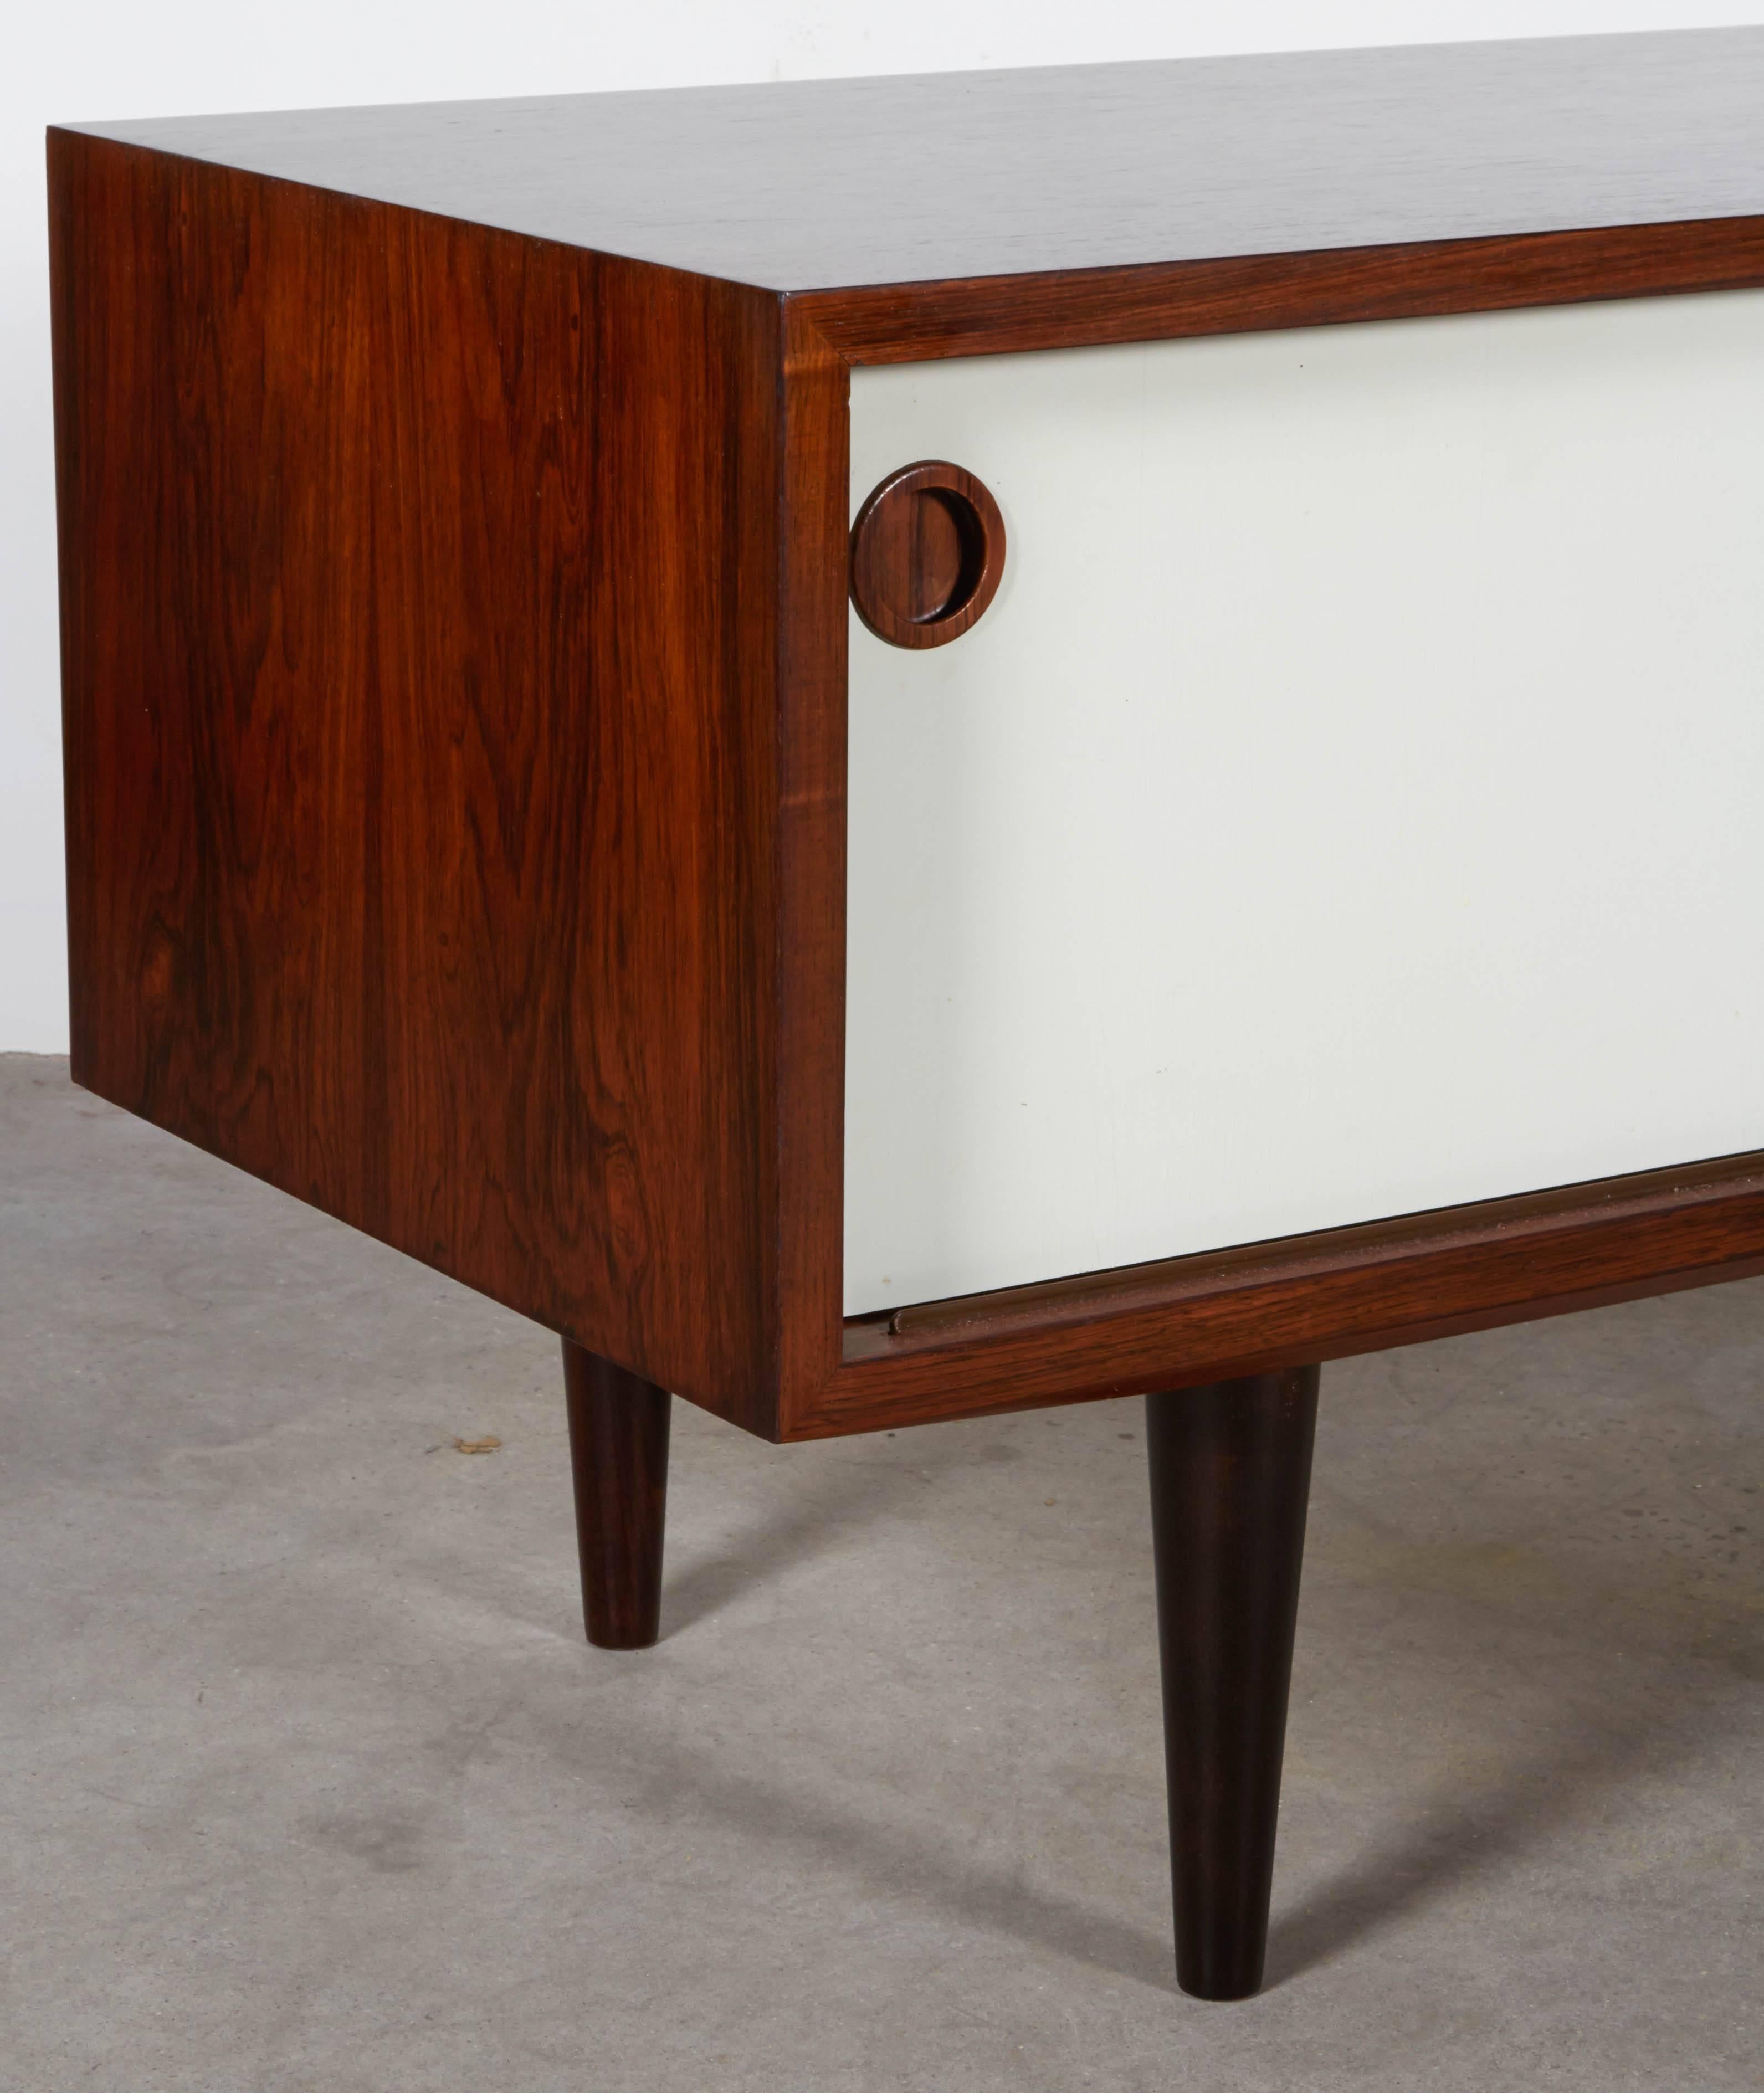 Rosewood Danish Low Credenza or Sideboard from Denmark, White